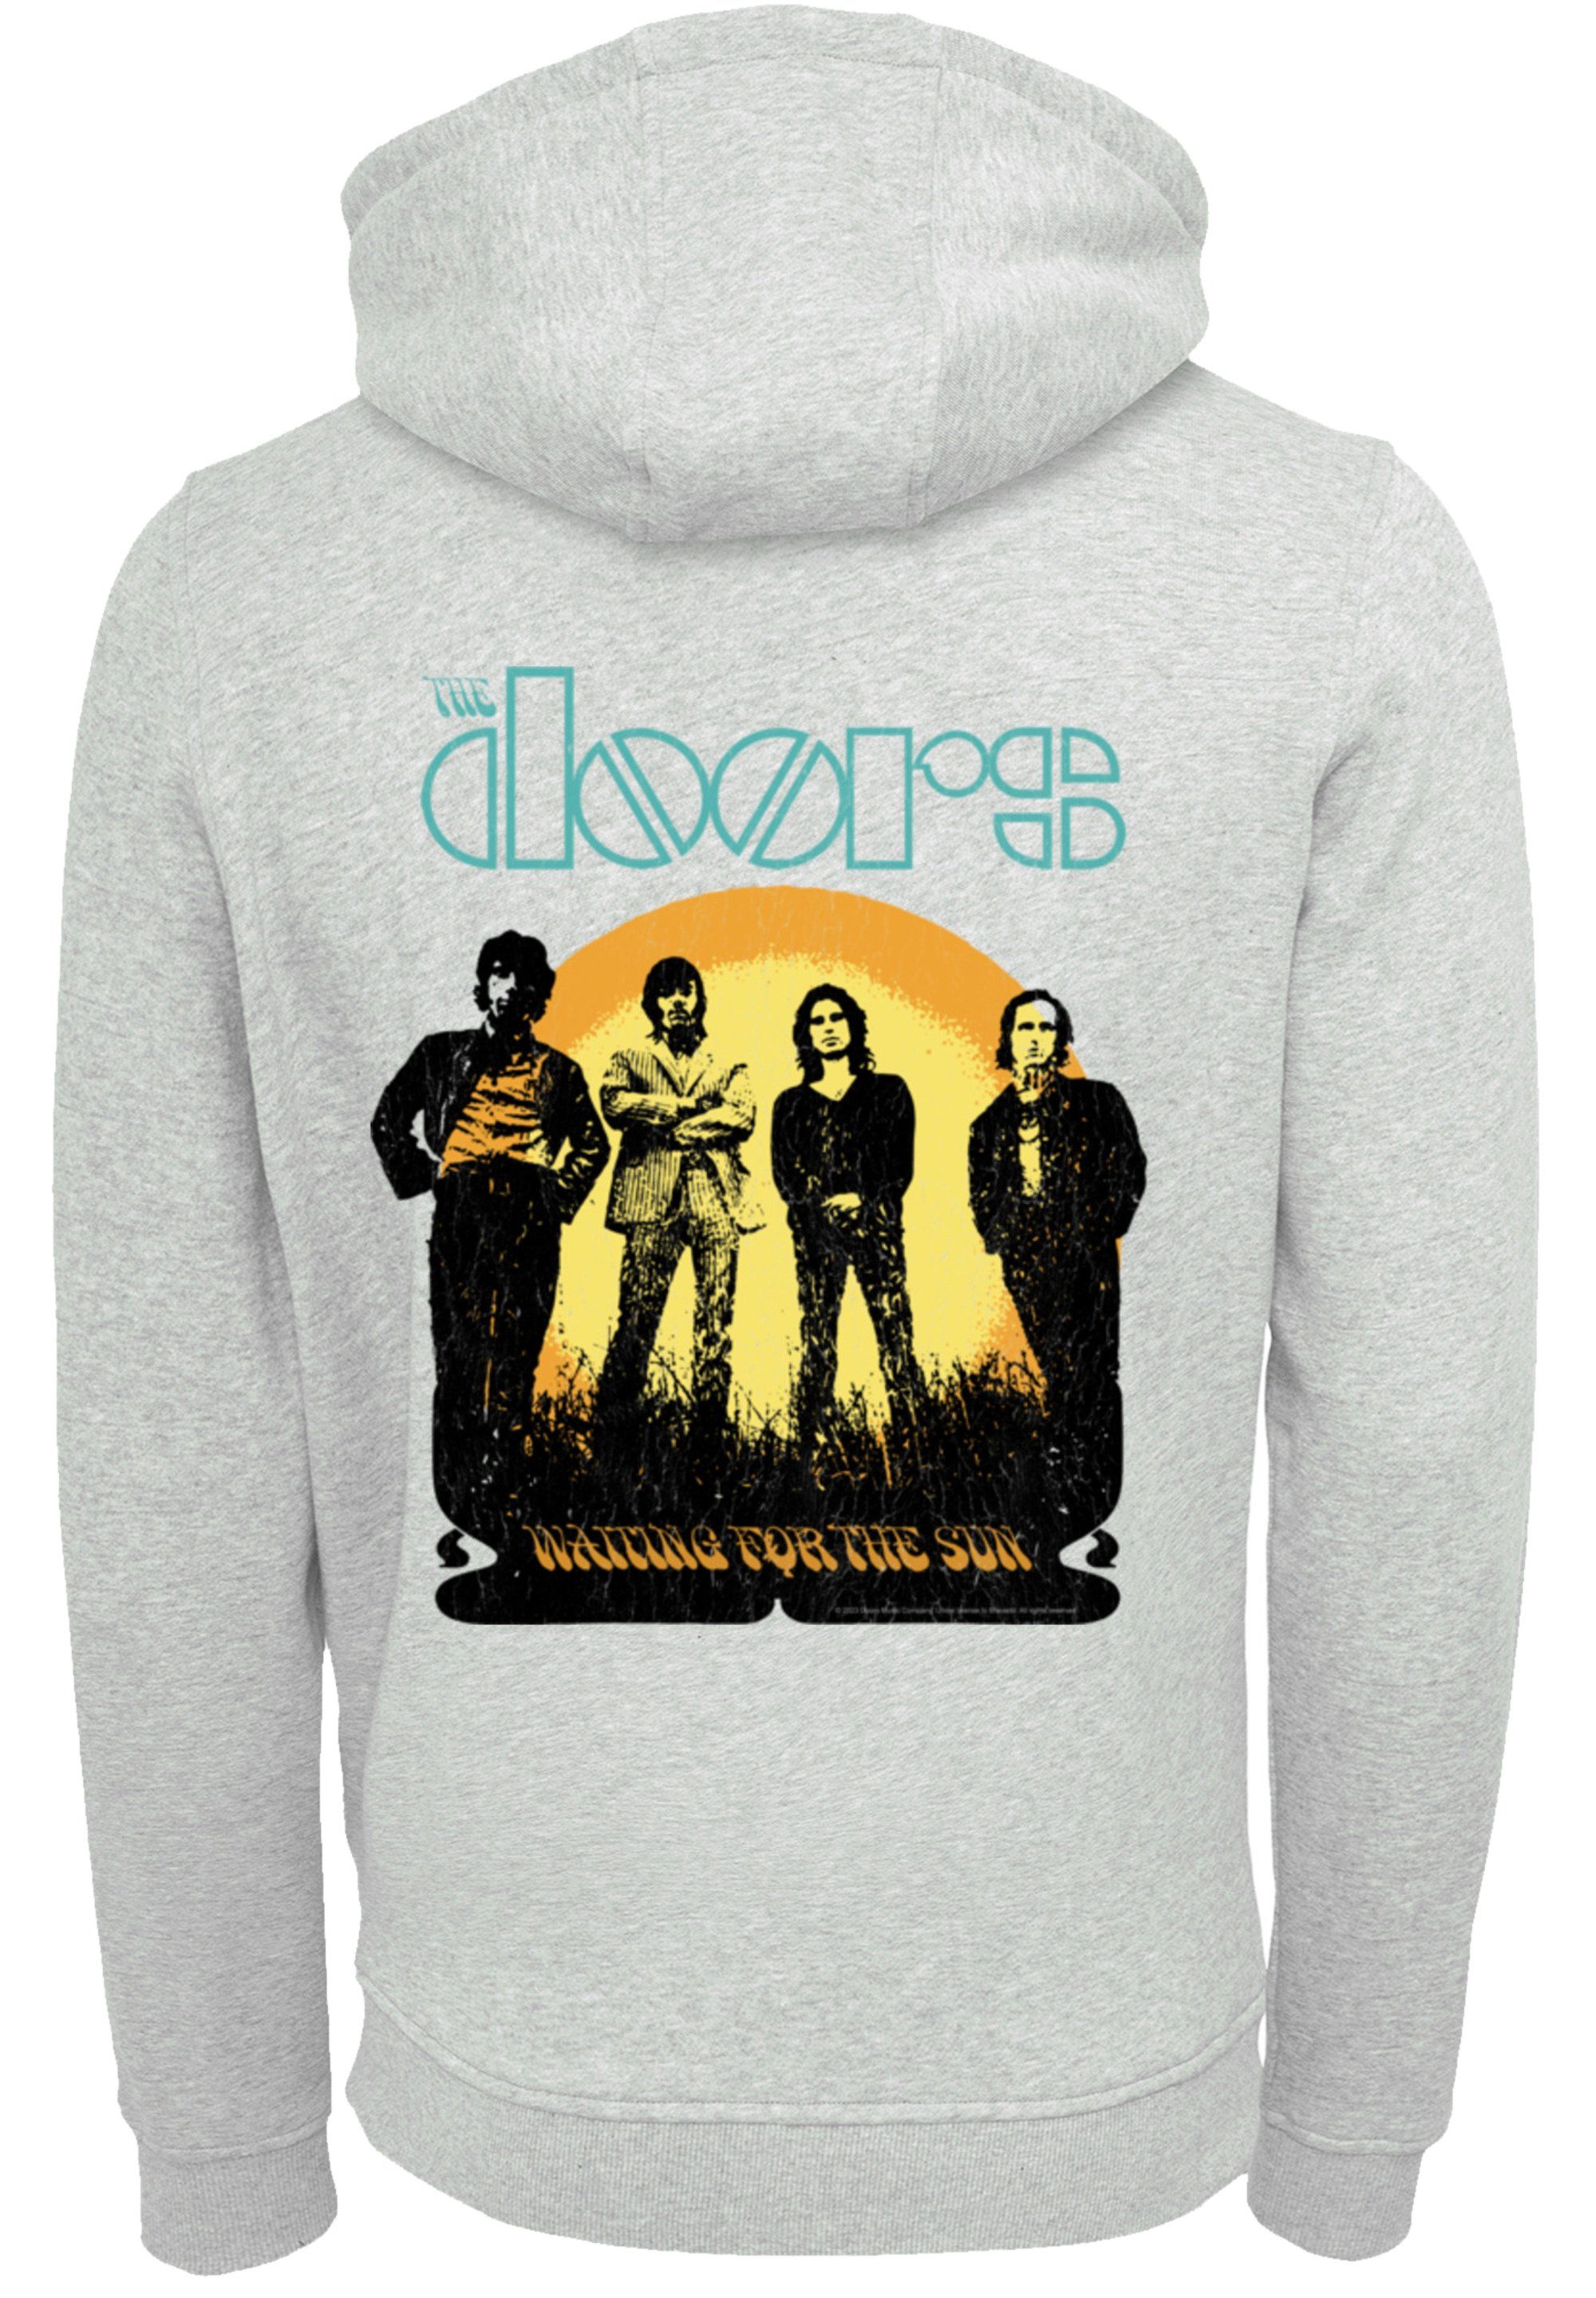 the Hoodie F4NT4STIC Band Logo Premium Qualität, The Doors grey Band, for Sun heather Music Waiting